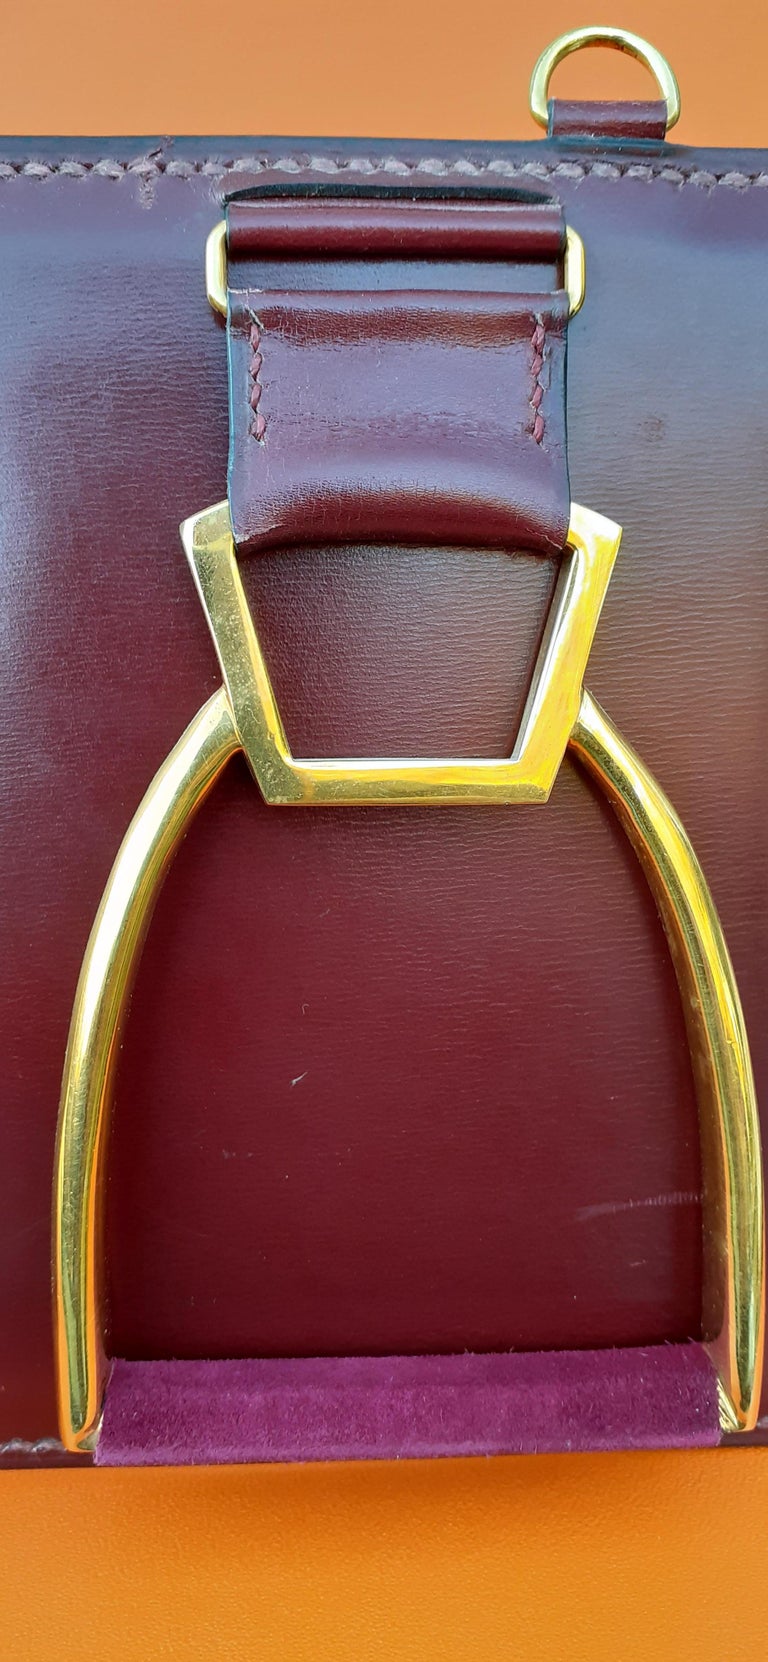 Exceptional Hermès Tie Hanger Tie Rack 3 Stirrups in Metal and Leather For Sale 3